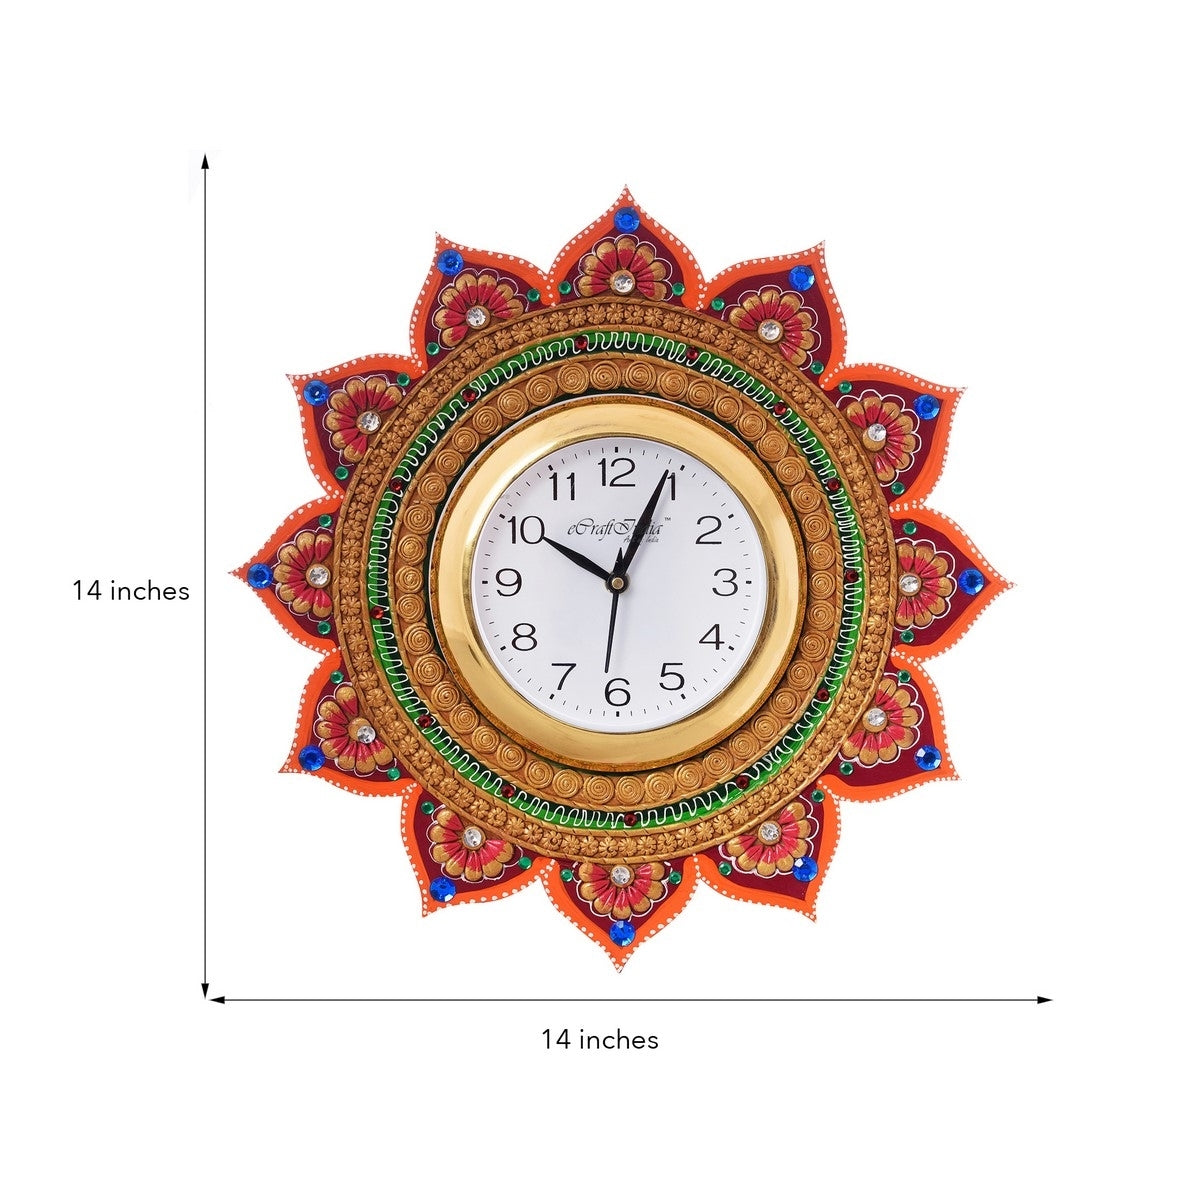 Royal and Elegant Handcrafted Flower Design Decorative Papier Mache Wooden Wall Clock 2